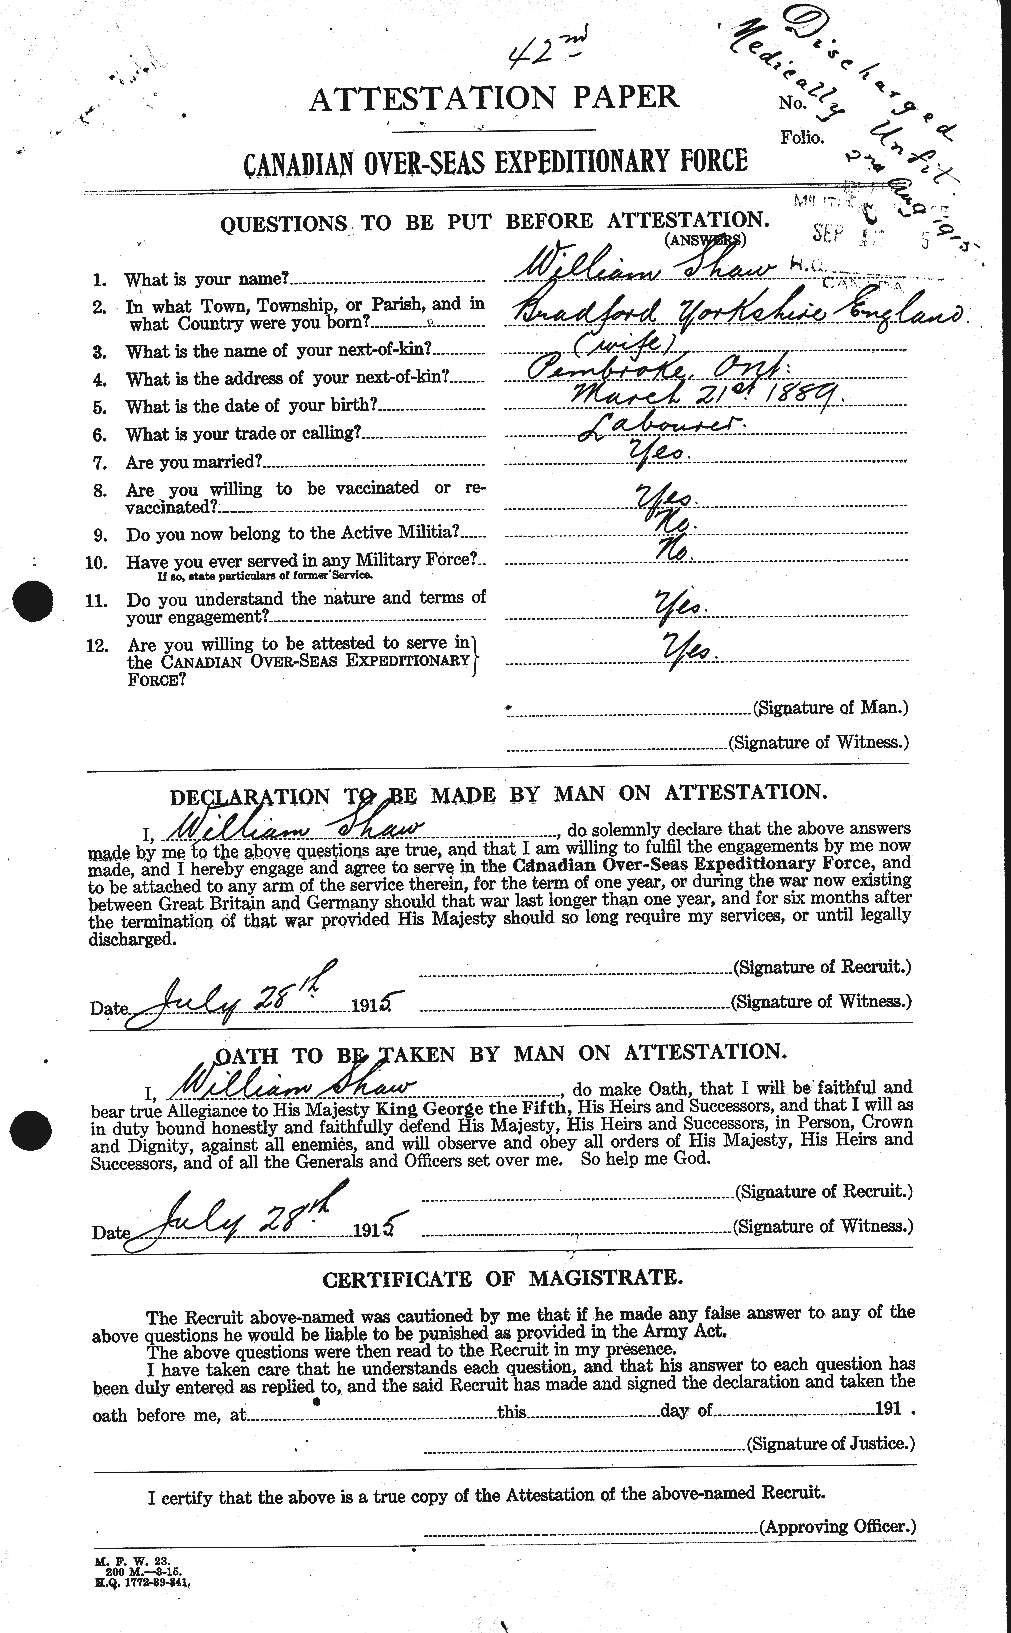 Personnel Records of the First World War - CEF 089440a